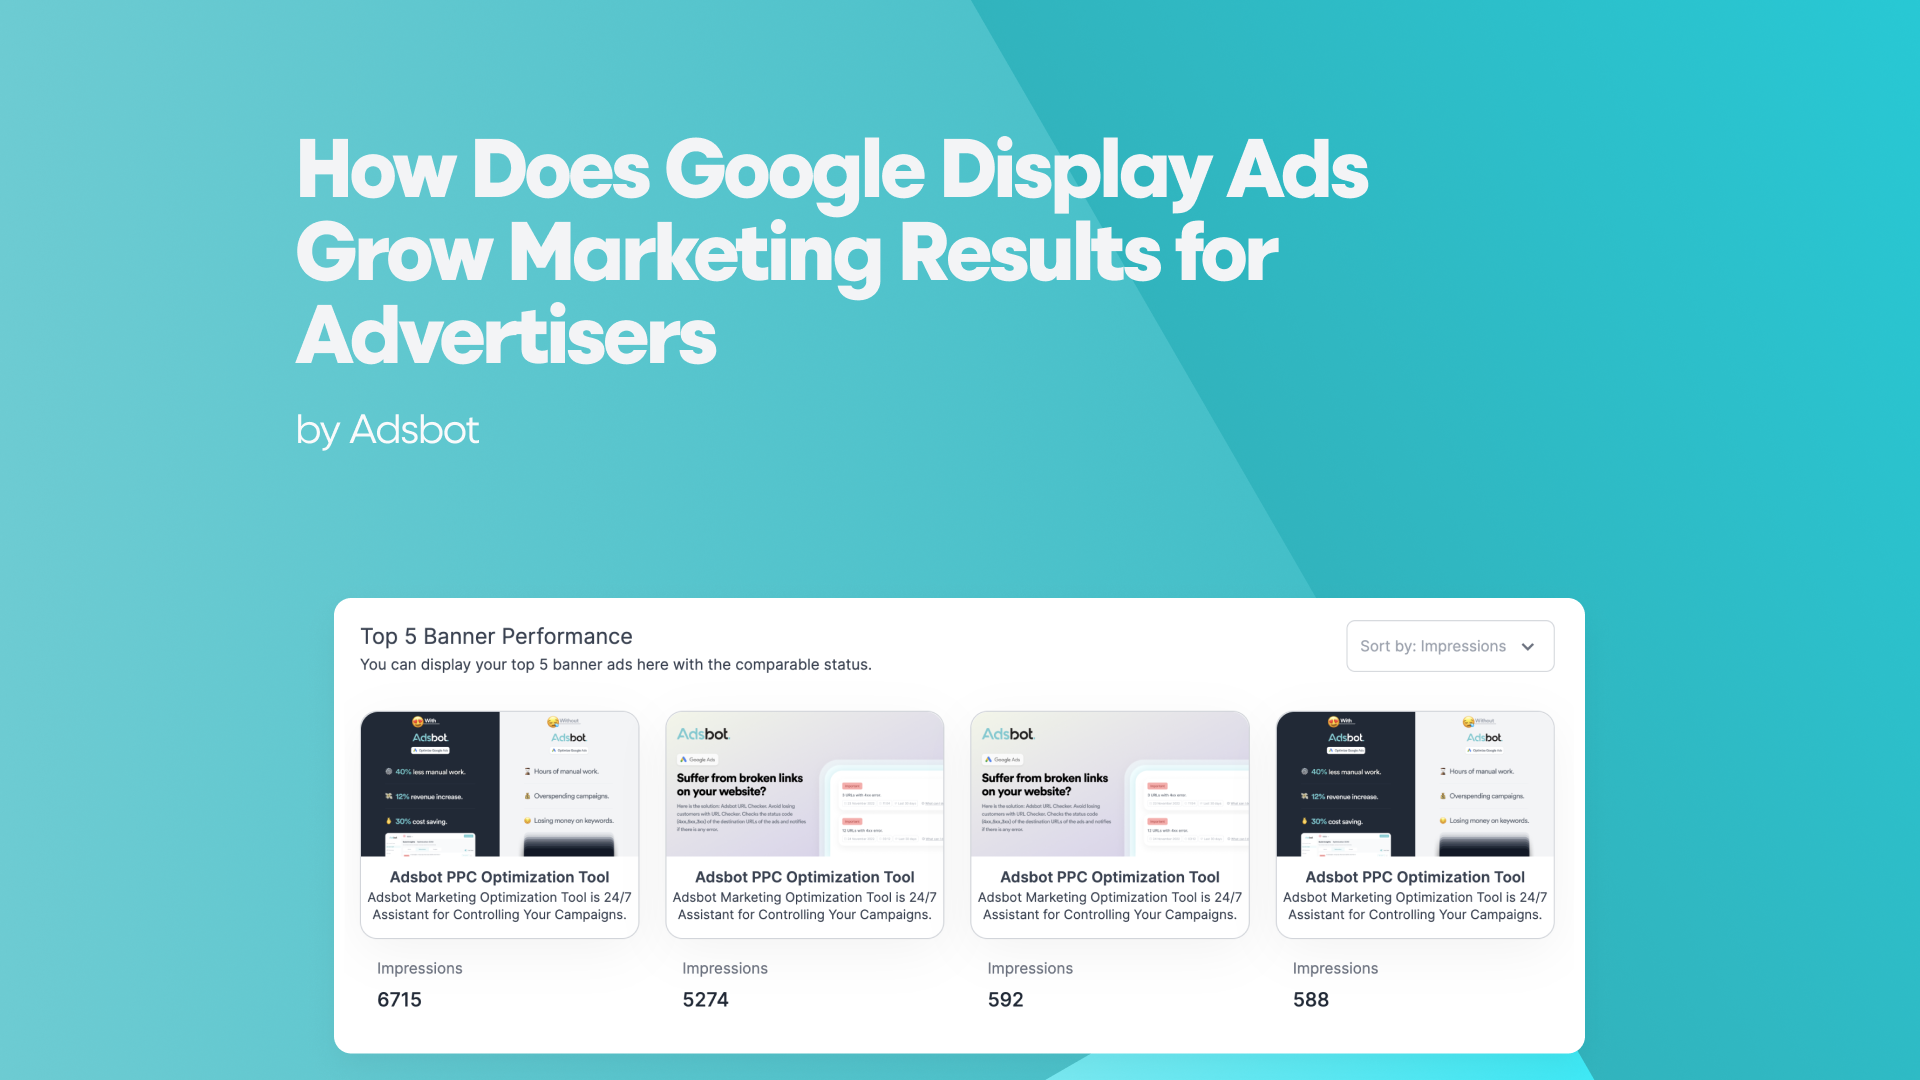 How Does Google Display Ads Grow Marketing Results for Advertisers?